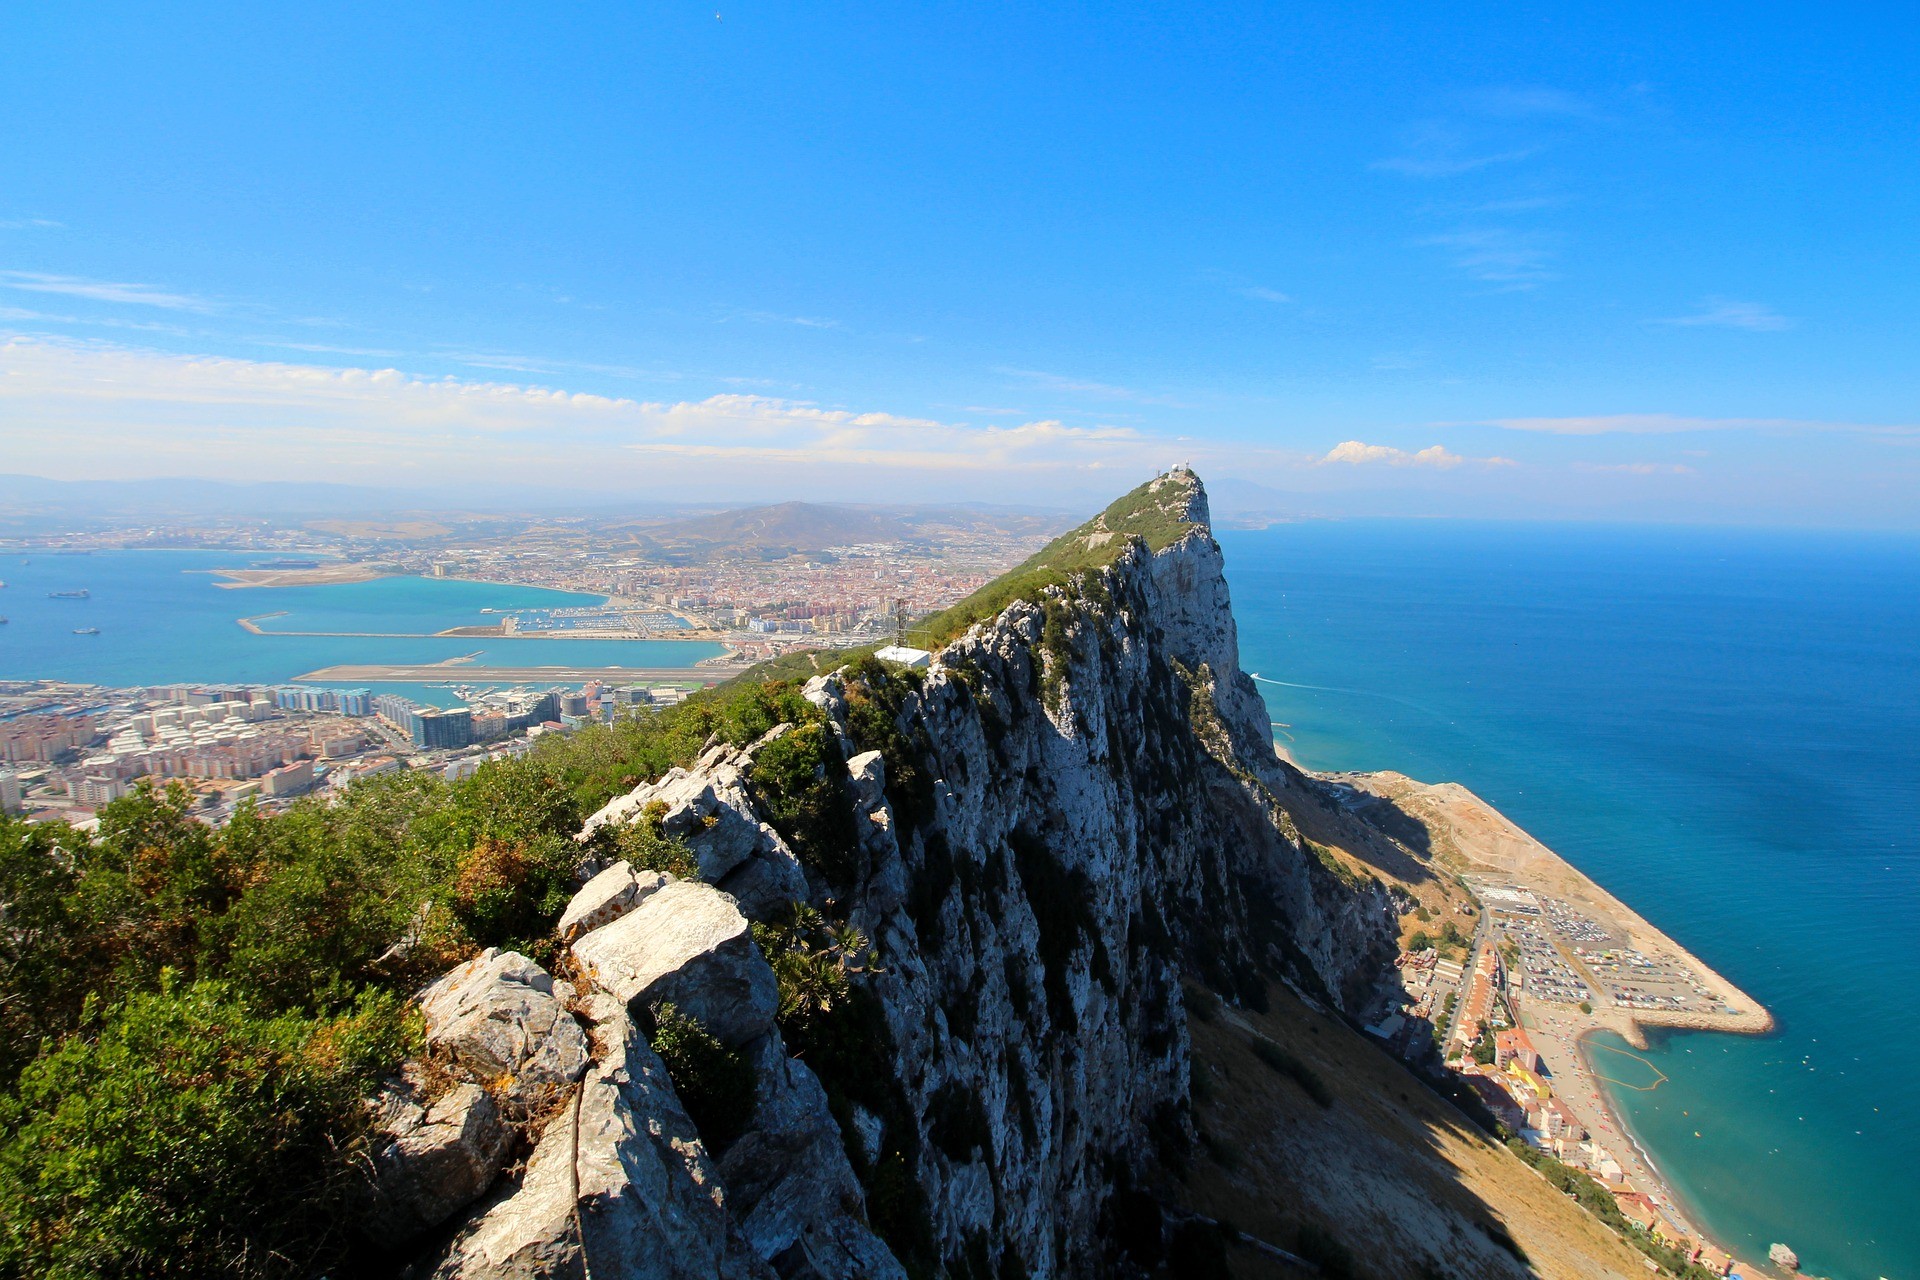 One day trip to Gibraltar